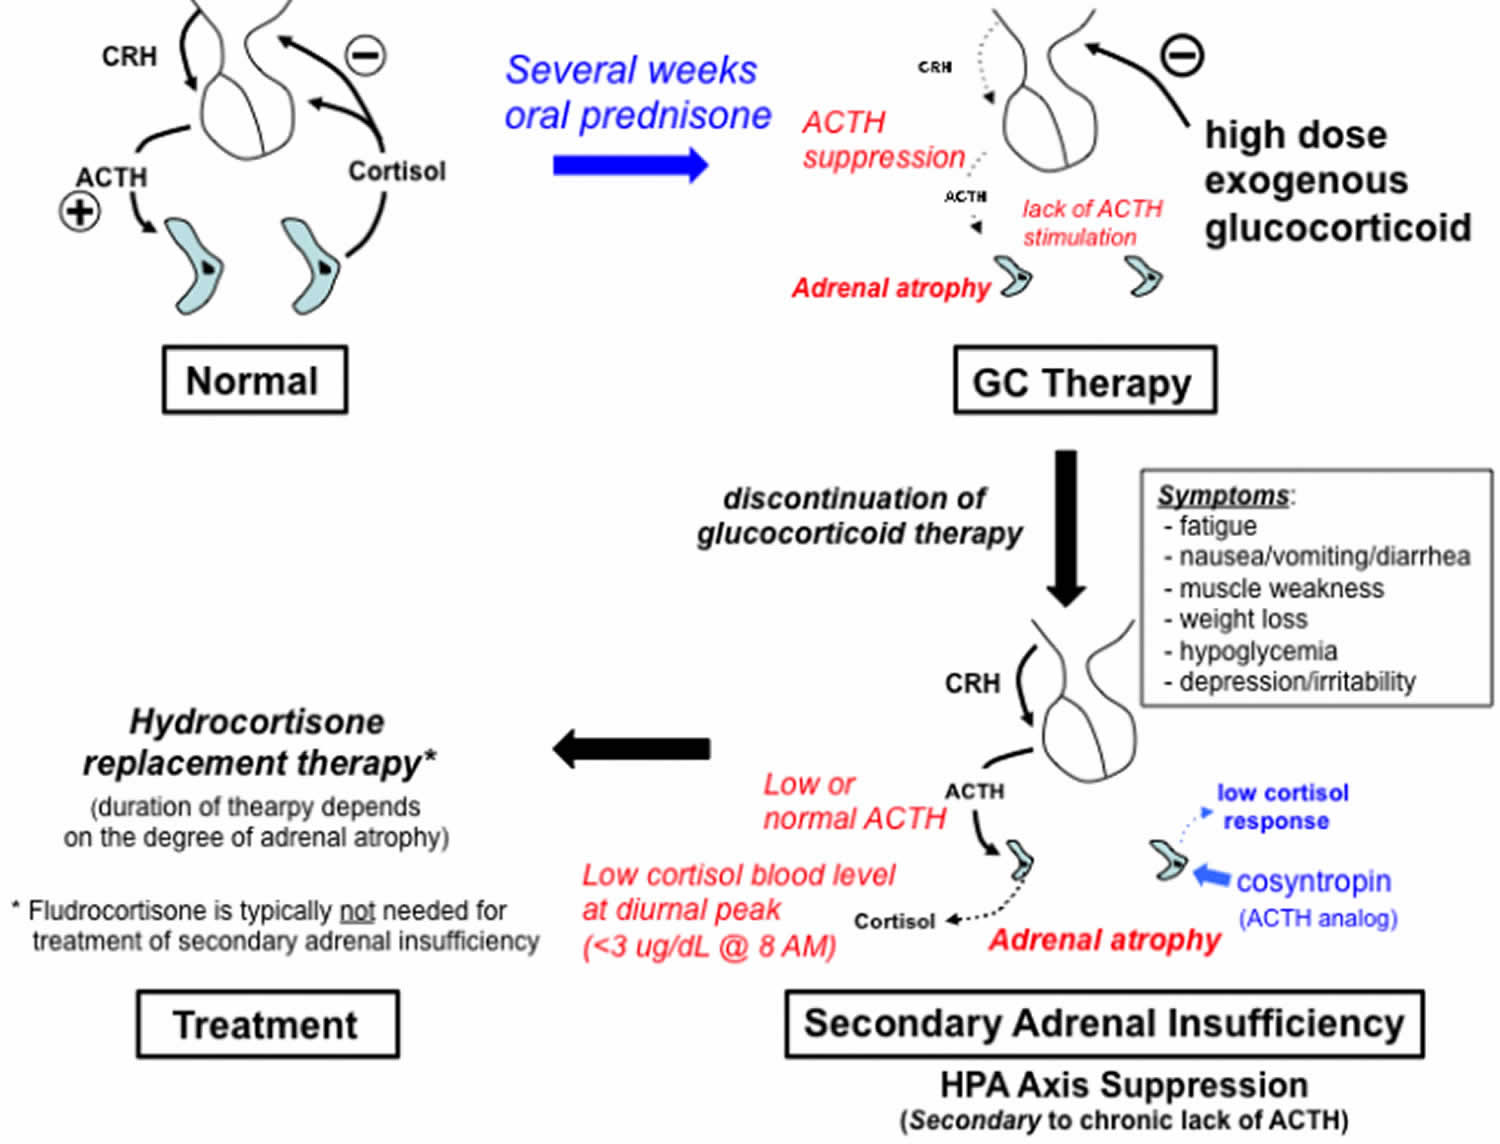 Secondary adrenal insufficiency caused by chronic glucocorticoid treatment